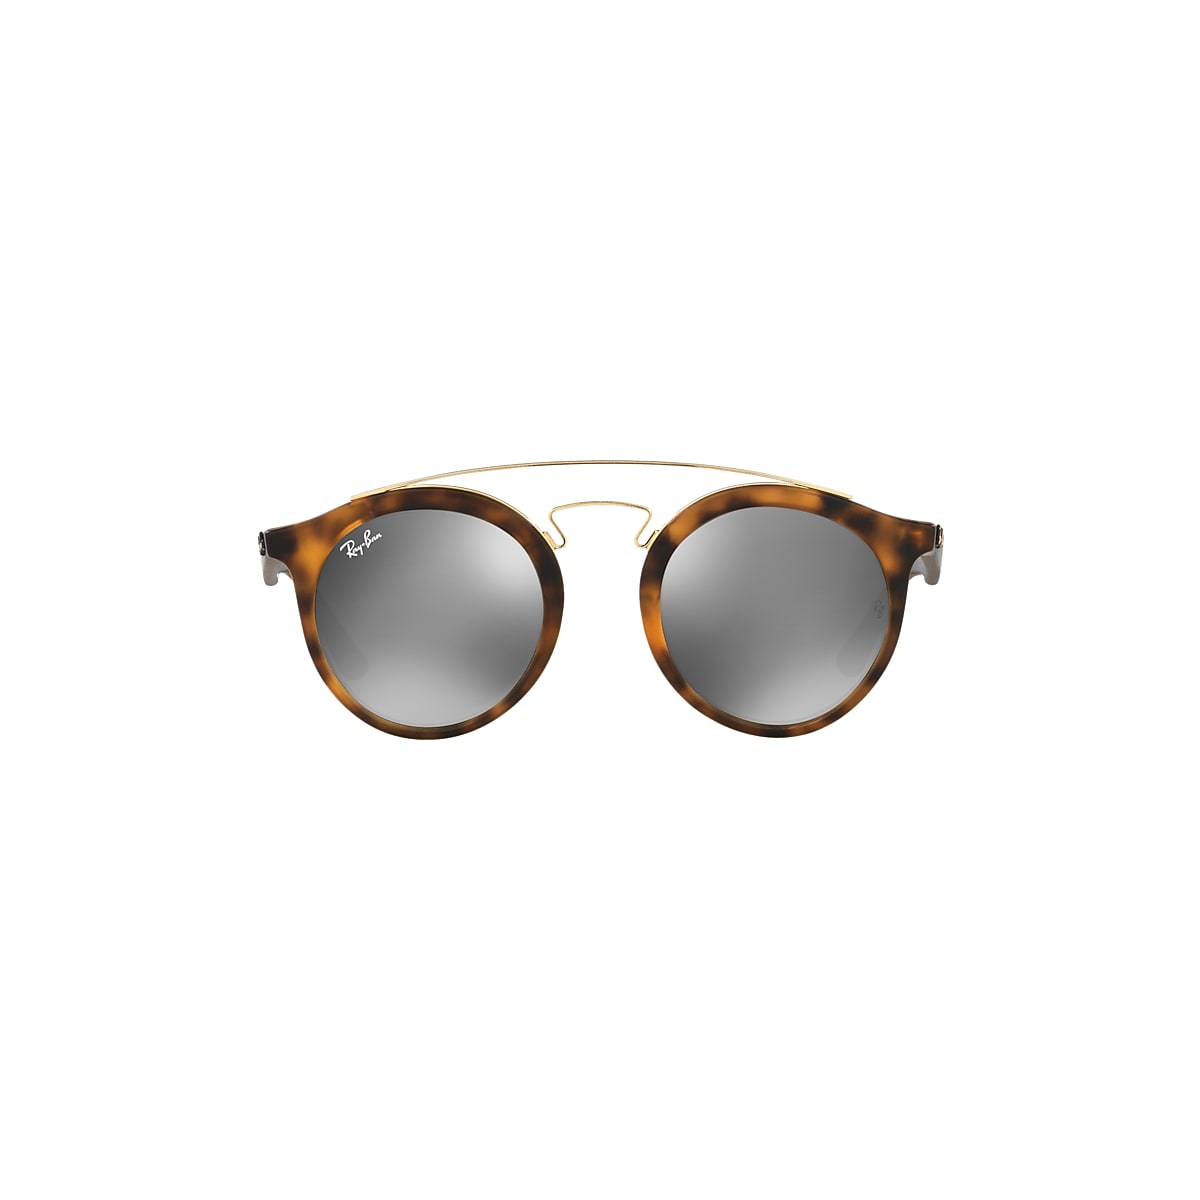 Rb4256 Gatsby I Sunglasses in Tortoise and Grey | Ray-Ban®